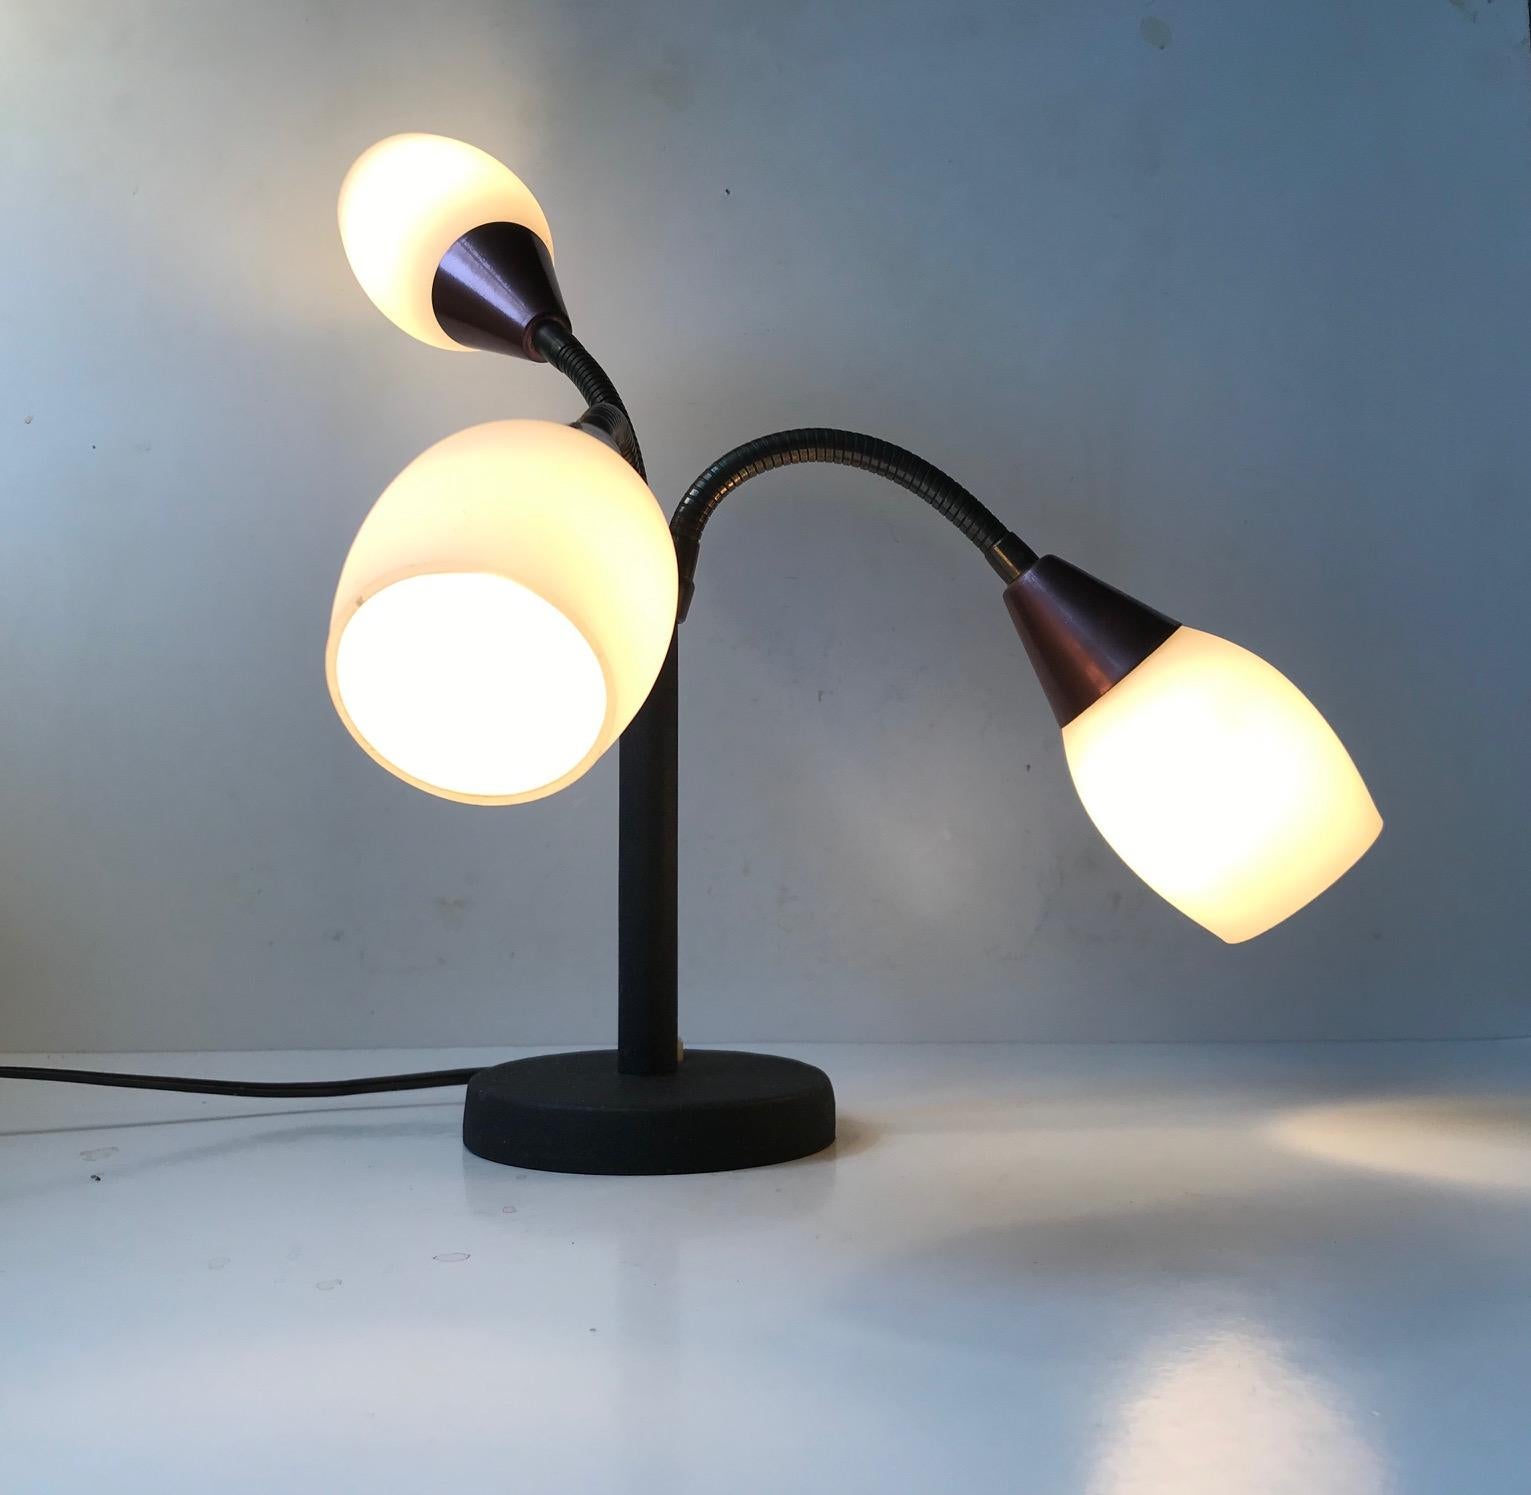 Three Shade Midcentury Table Lamp by E. S. Horn, 1950s For Sale 3